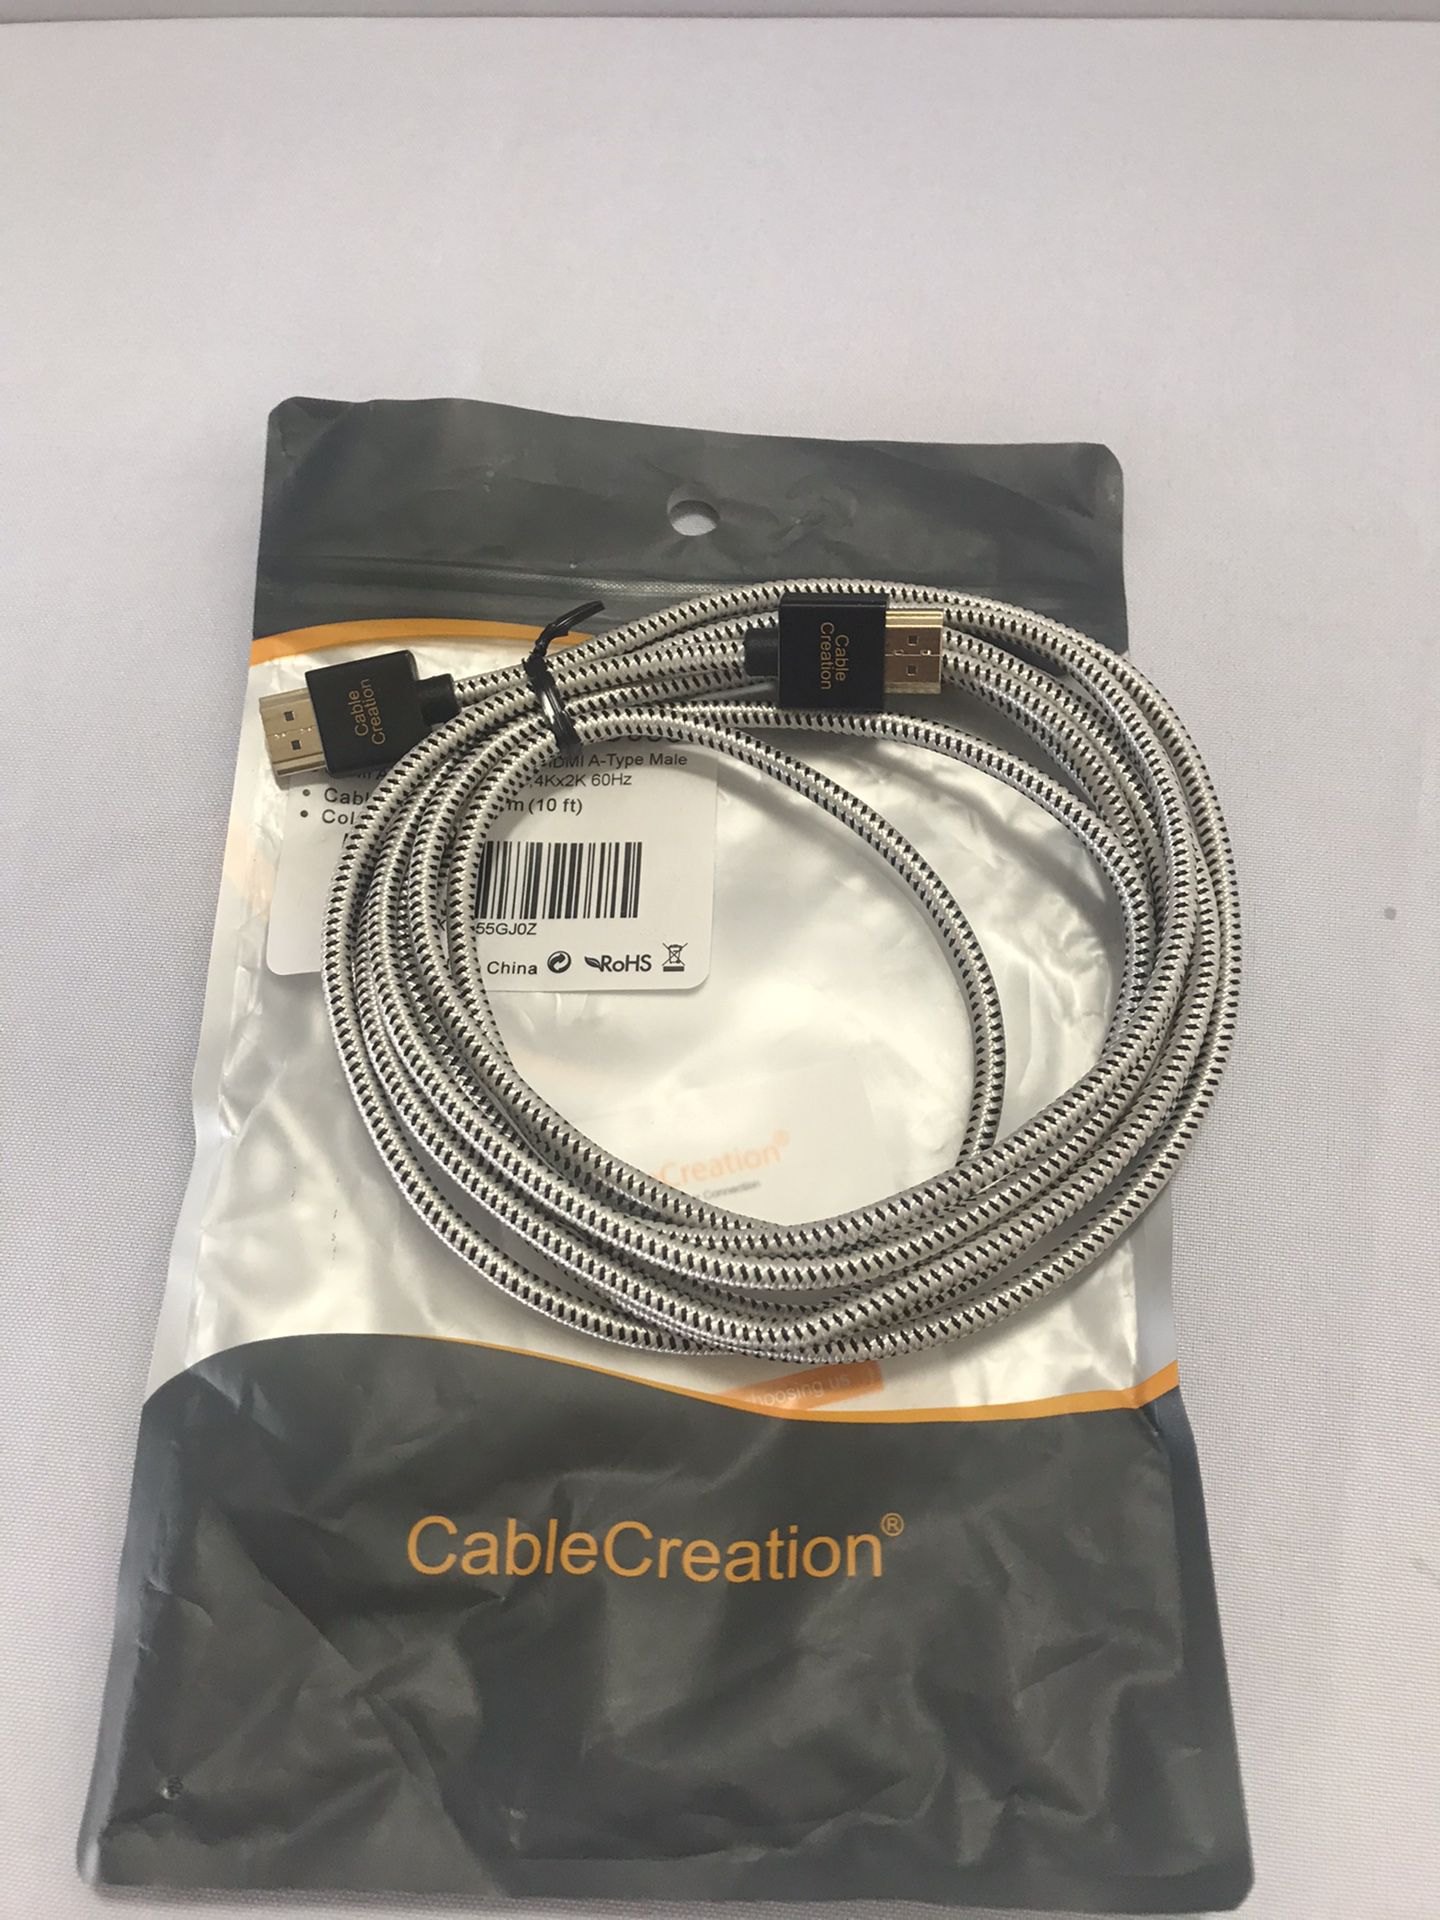 Ultra Thin HDMI Cable Male to Male, CableCreation 10ft HDMI 2.0 High-Speed Slim Low Profile Cable, Support 3D, 4K@60Hz, Audio Return Channel(ARC) for